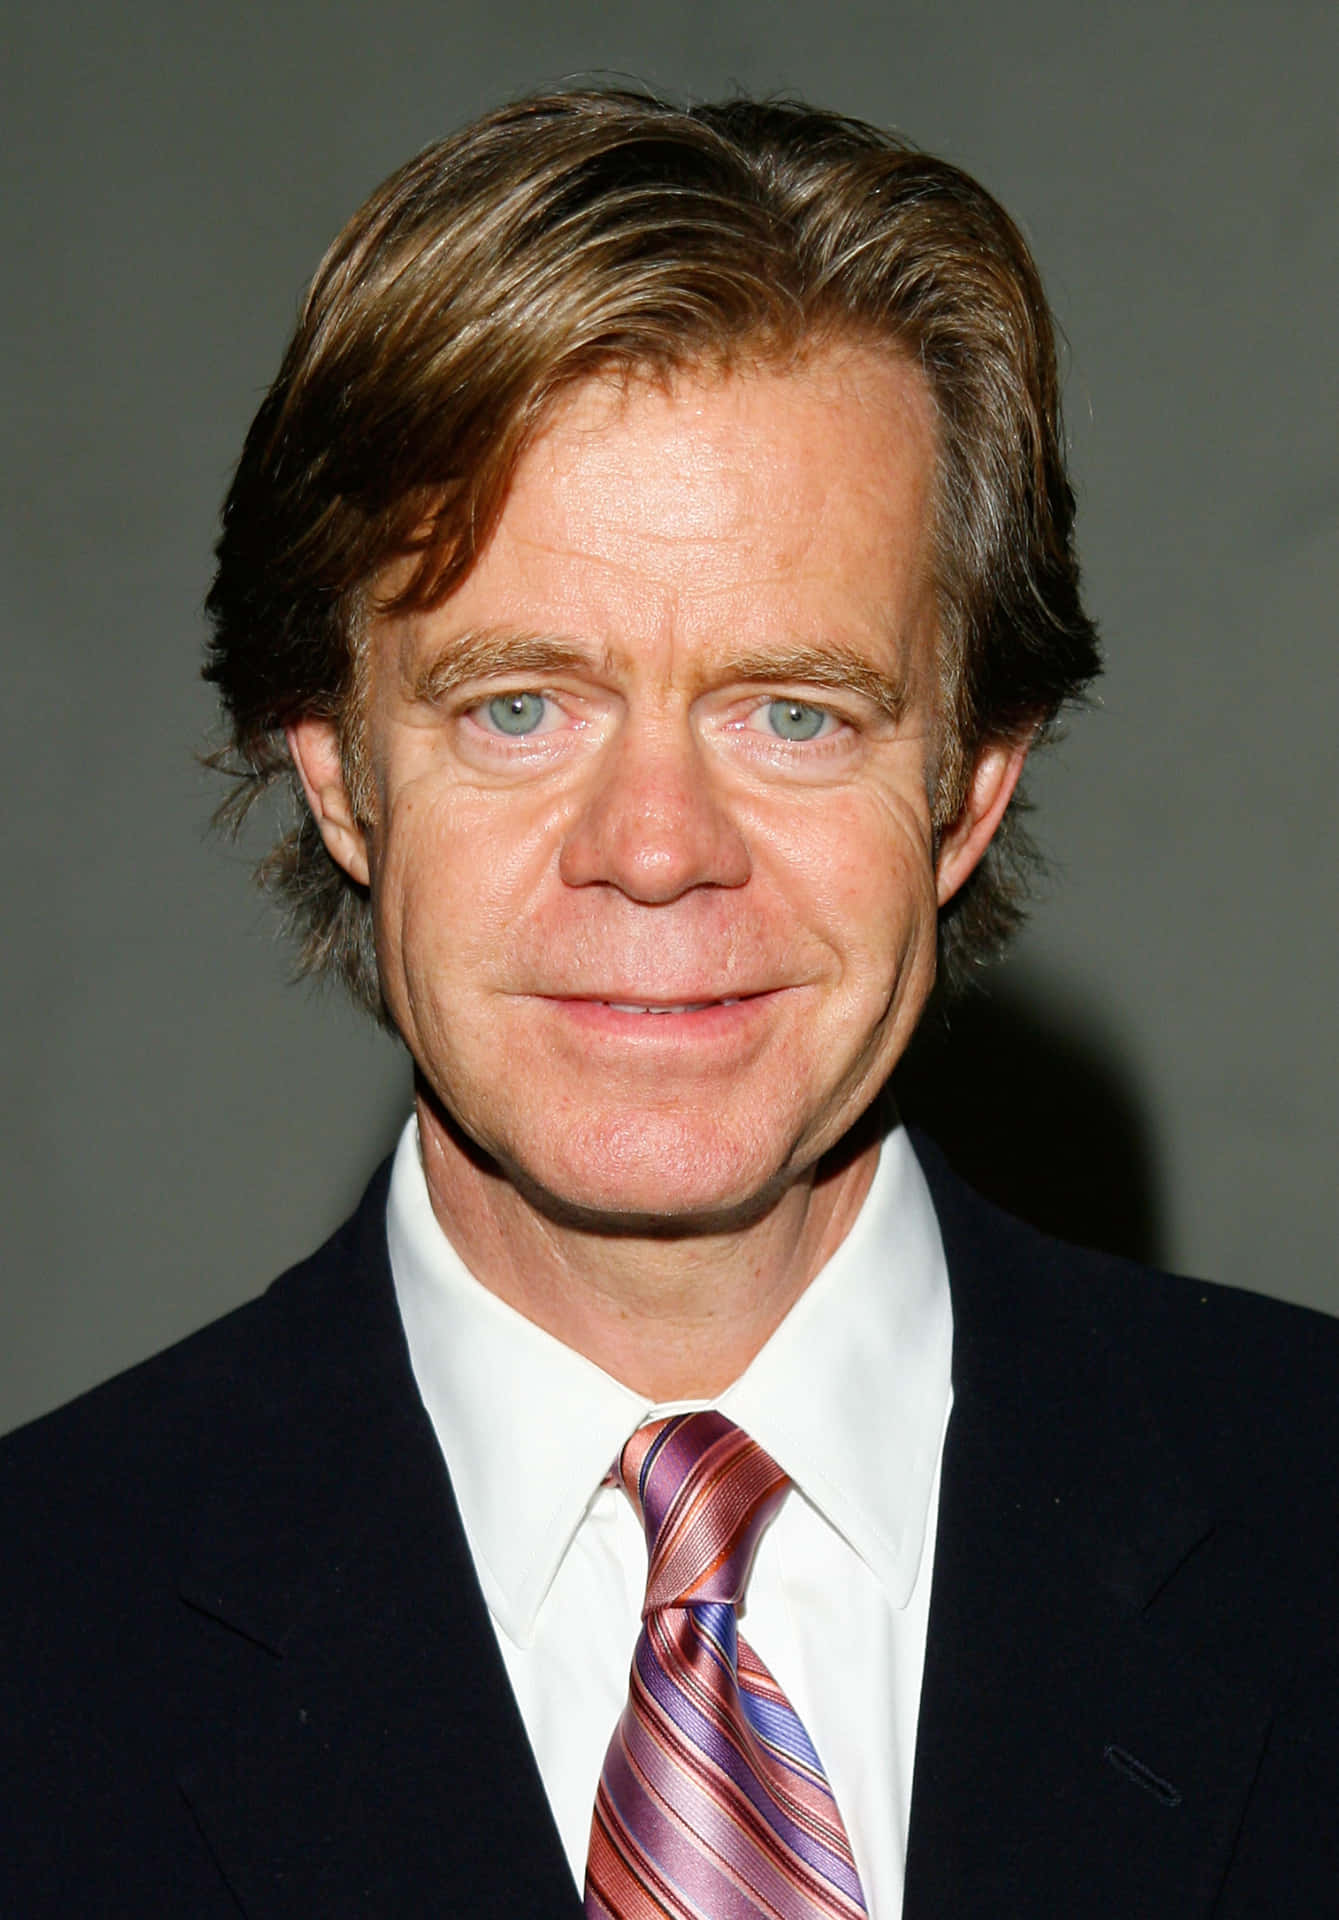 Emmy-nominated Actor William H. Macy Poses For A Portrait.